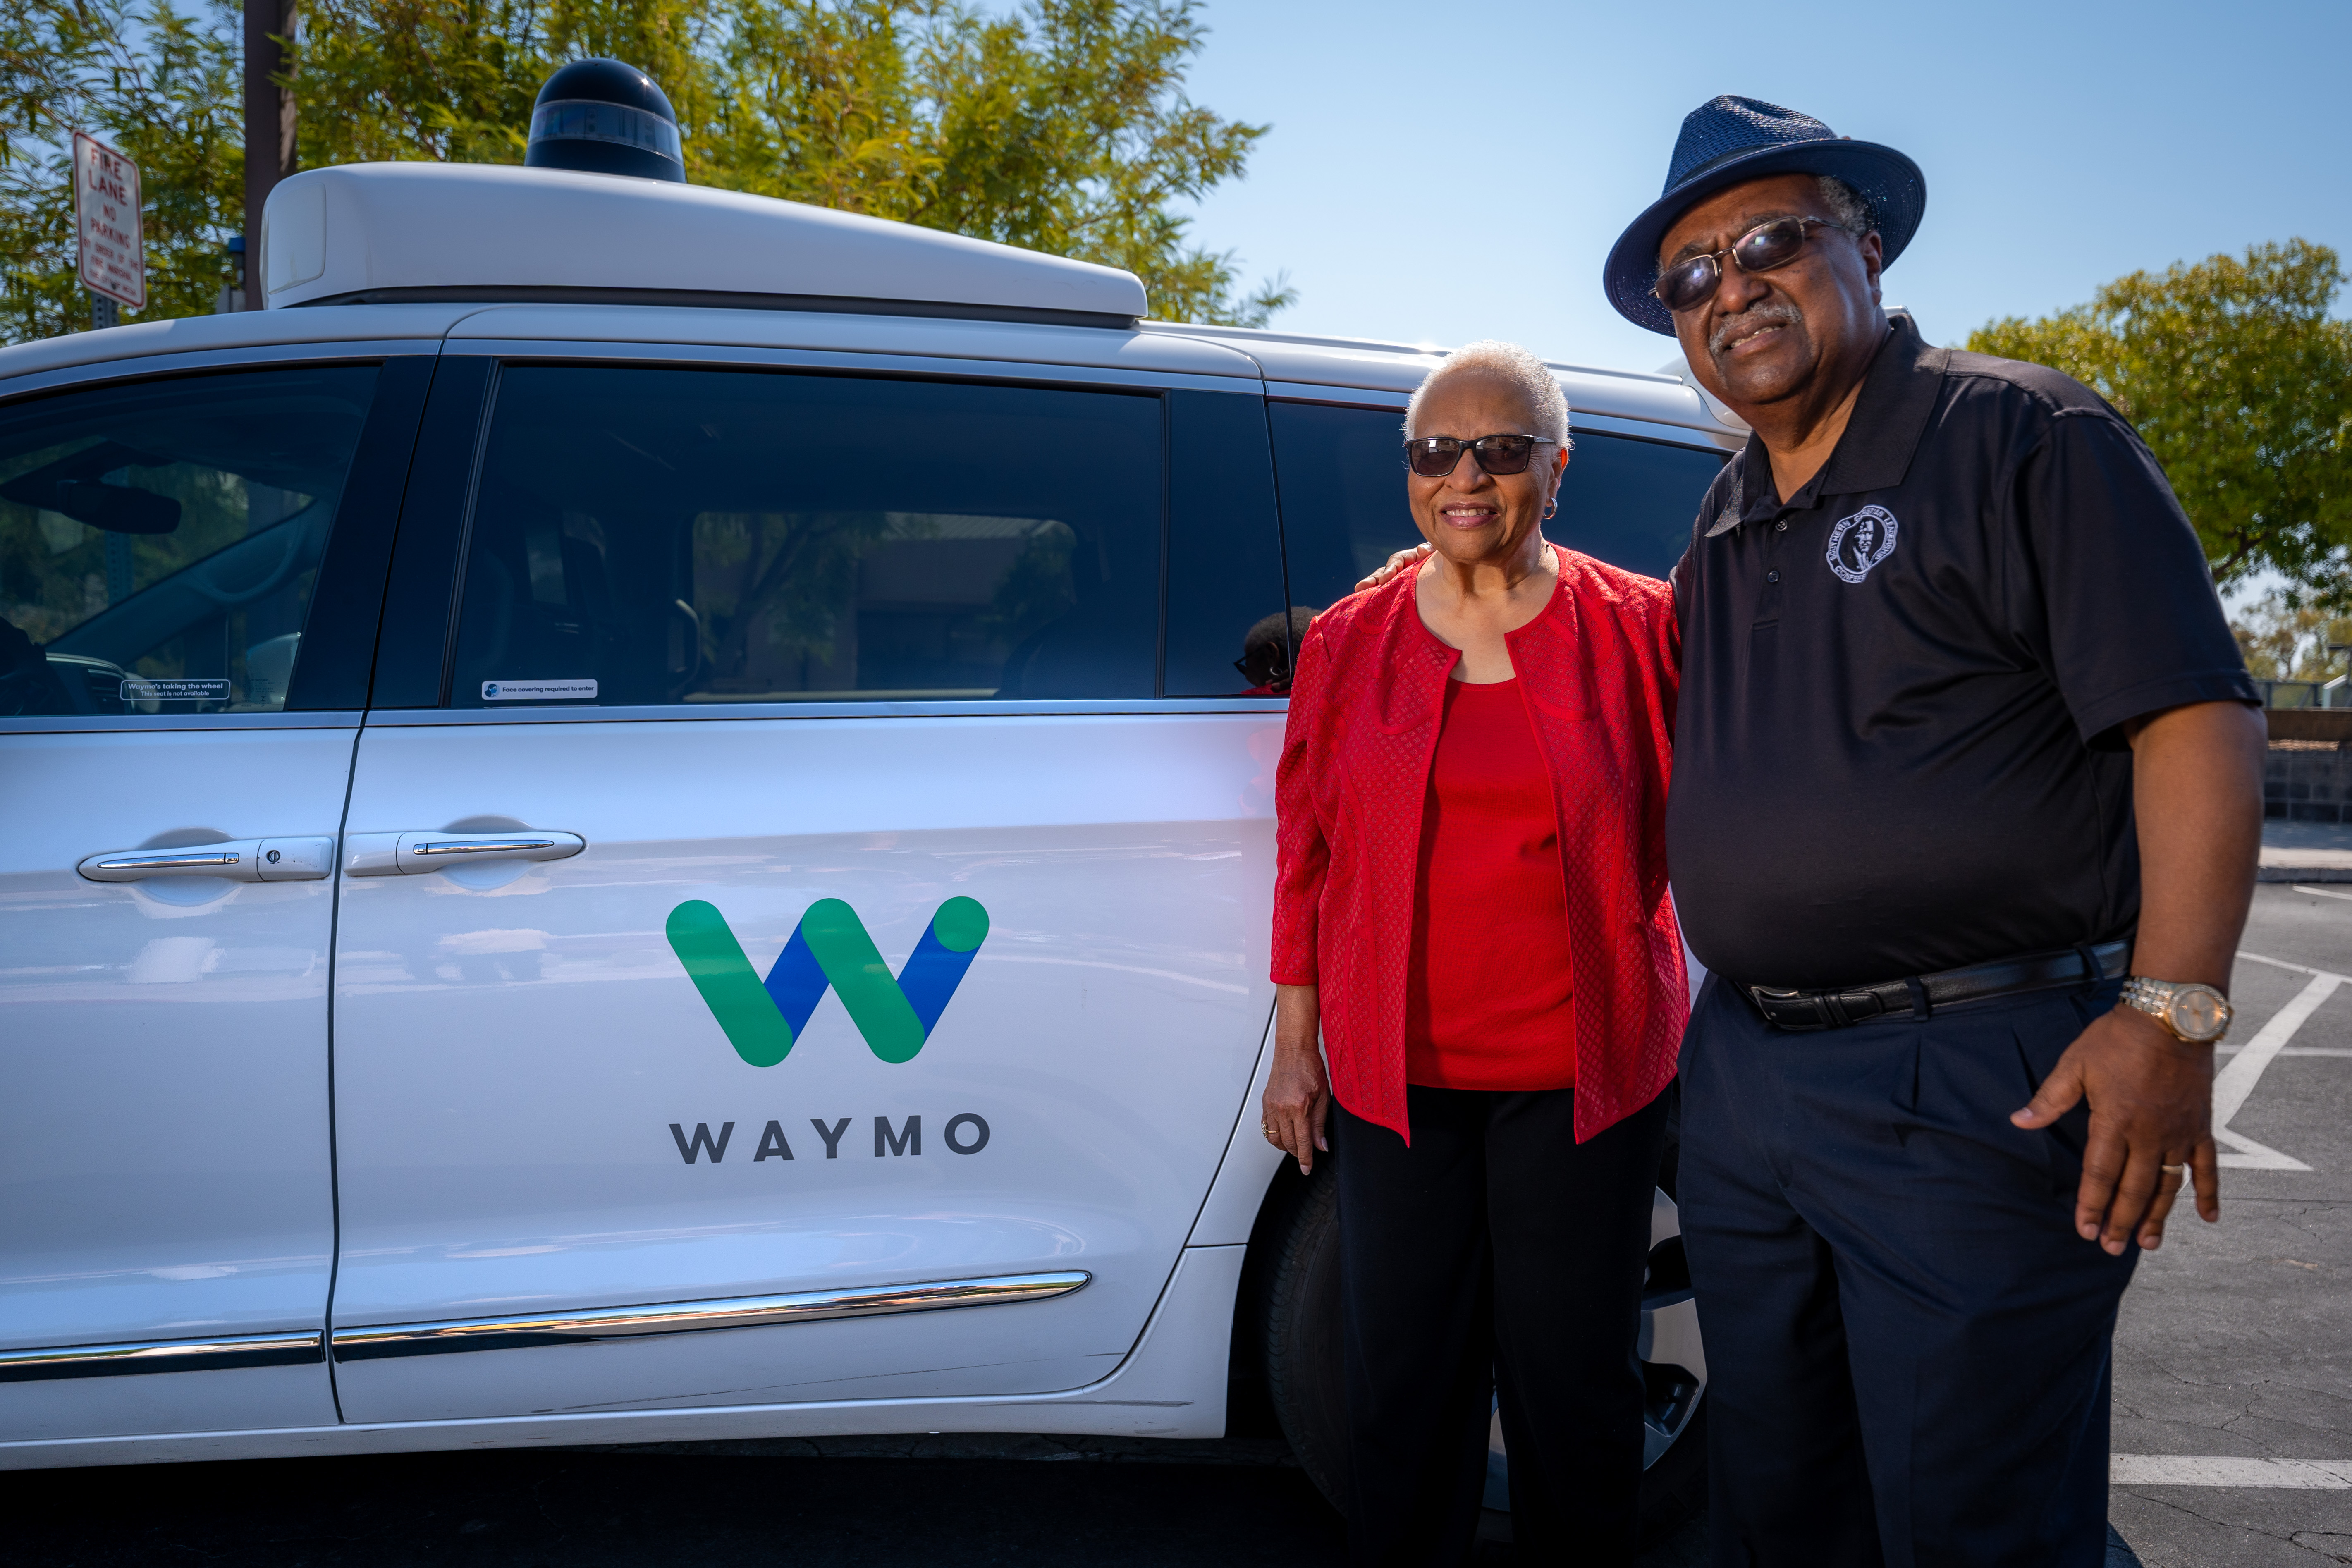 Woman and man standing in front of Waymo autonomous vehicle